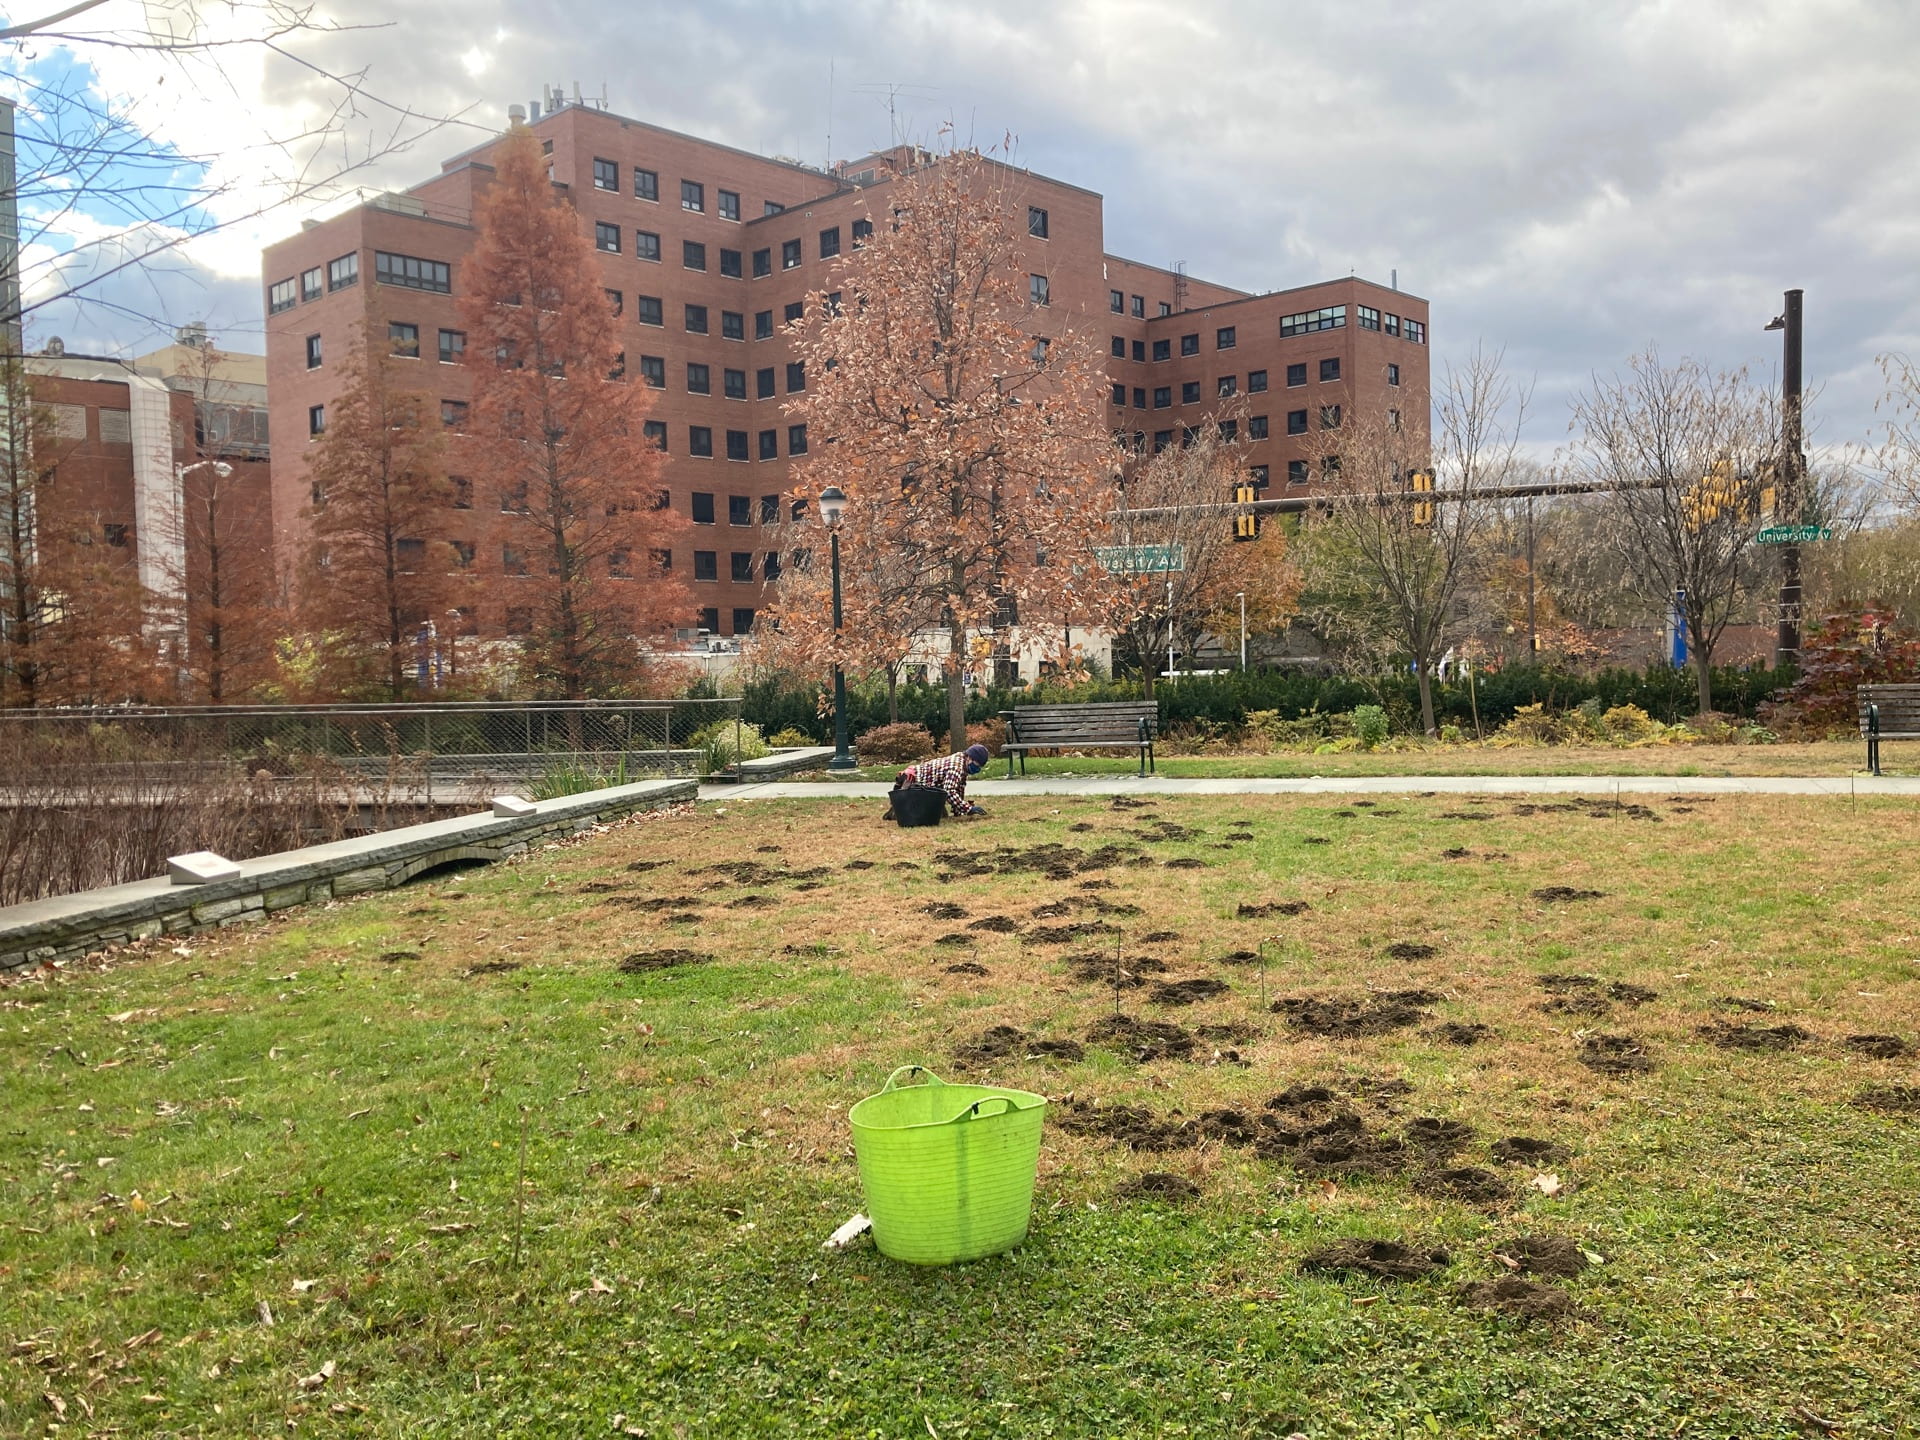 2,500 Crocus tommasinianus bulbs were planted in the Plaza Lawn. In late winter purple flowers will bloom amongst the grass.